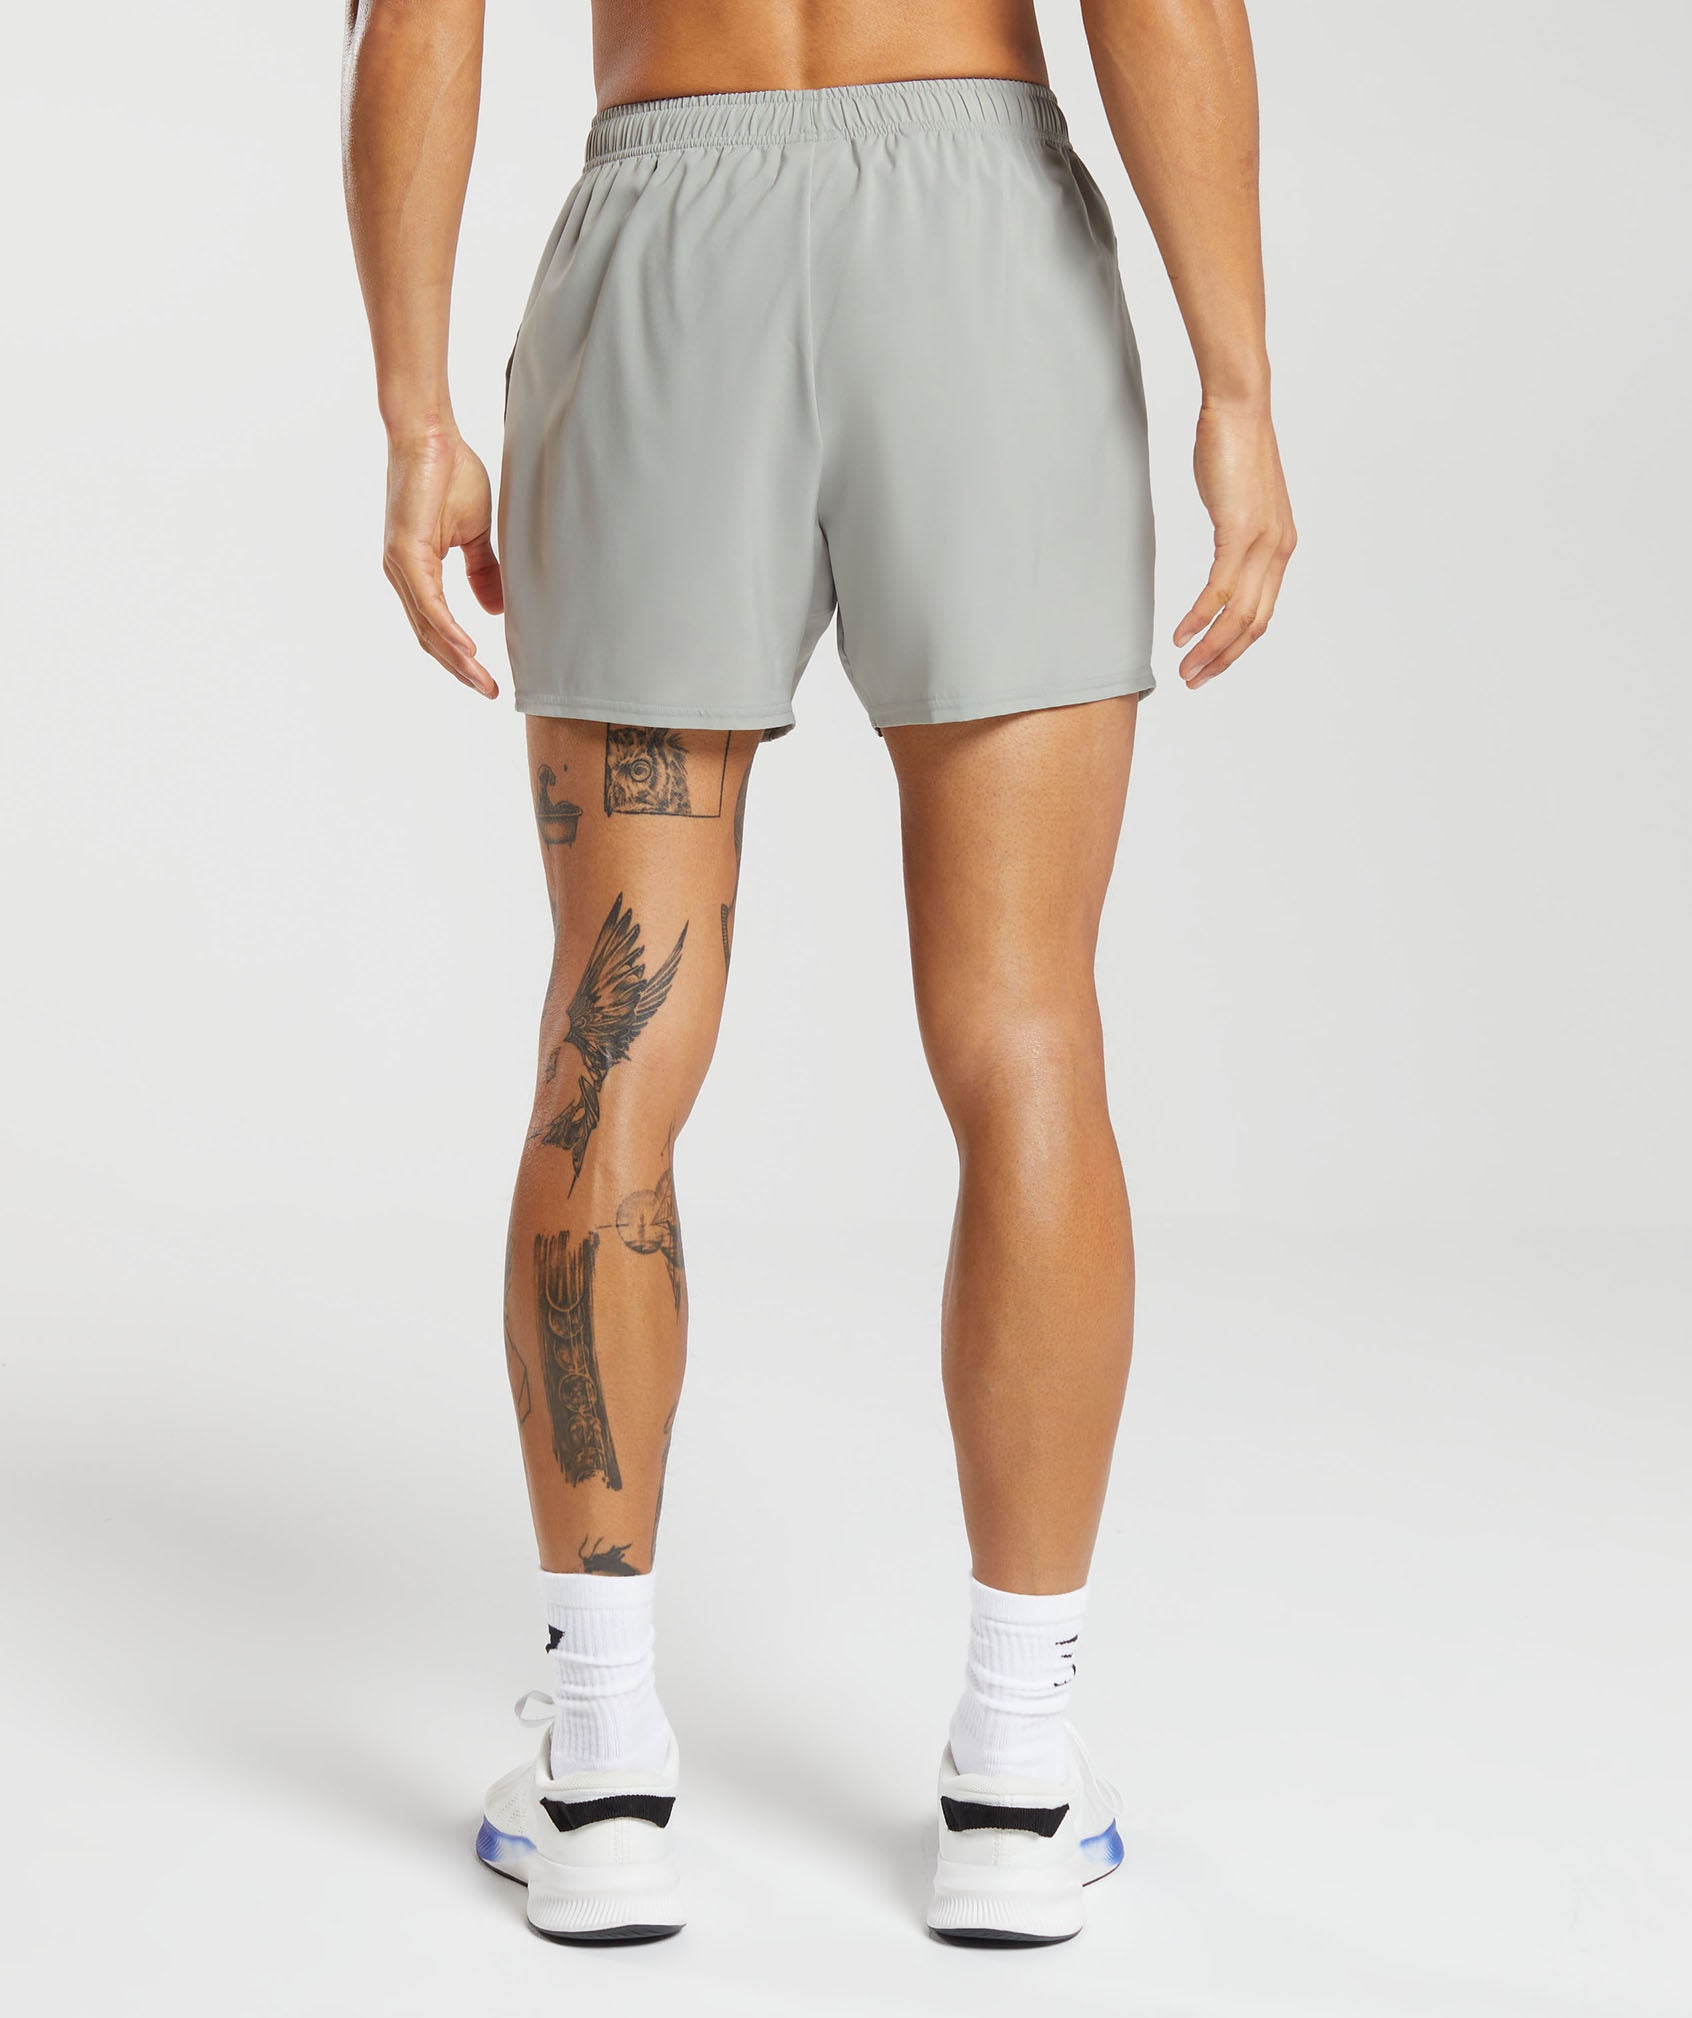 Arrival 5" Shorts in Stone Grey - view 2